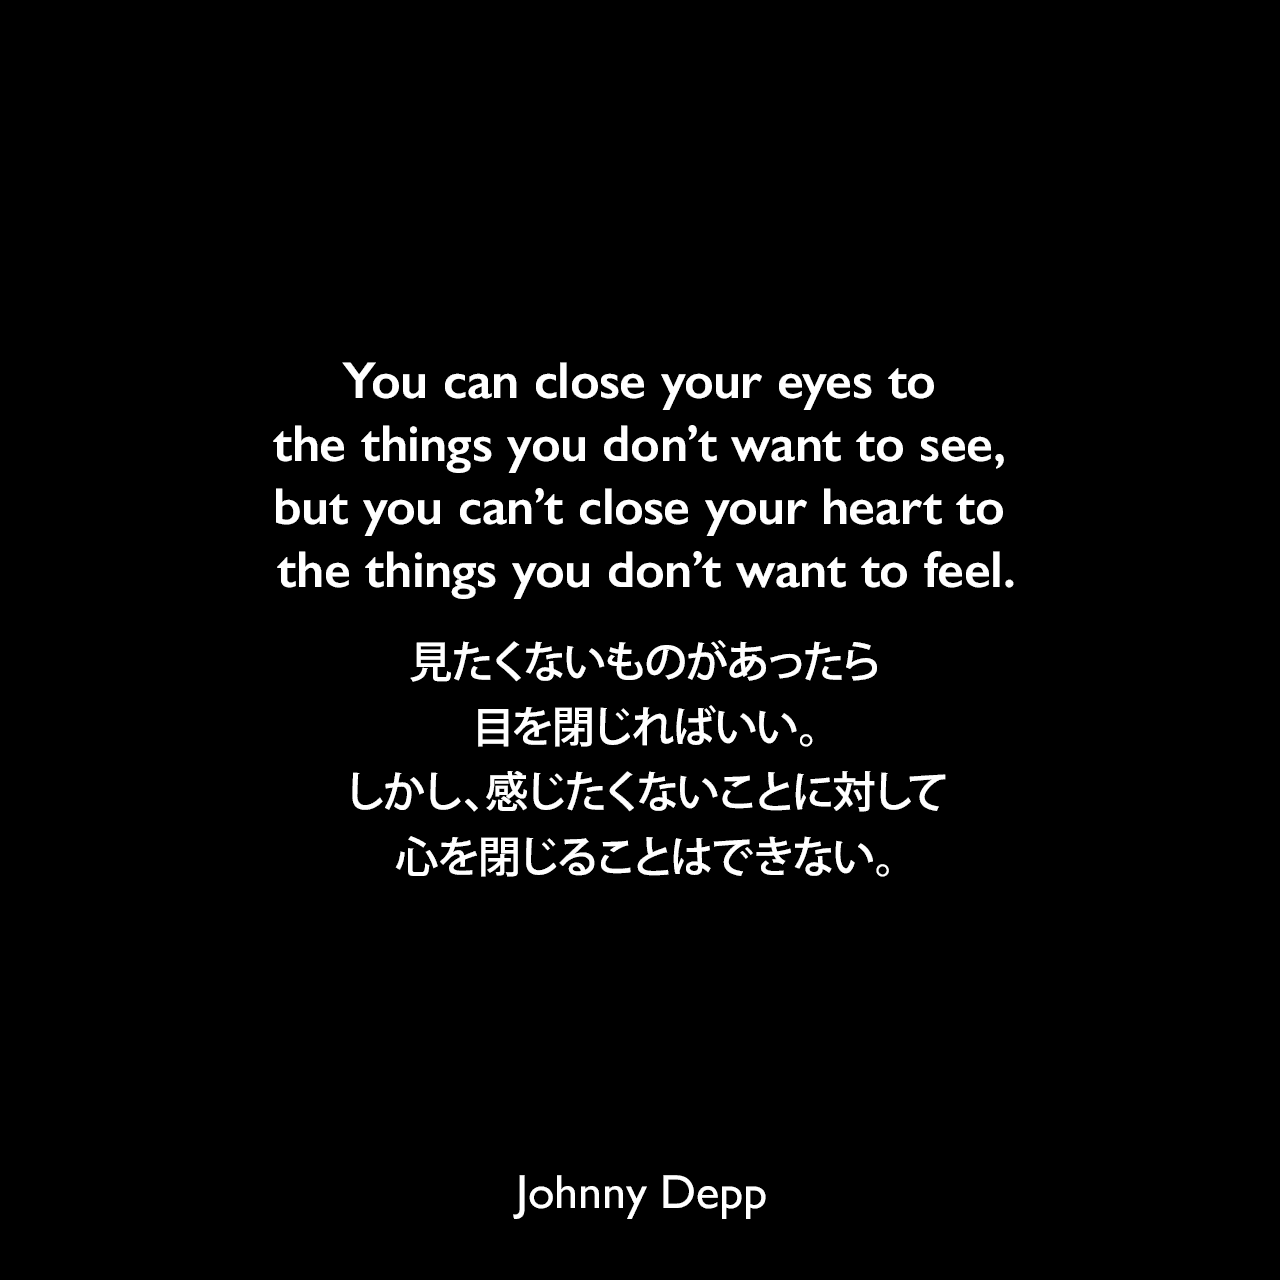 You can close your eyes to the things you don’t want to see, but you can’t close your heart to the things you don’t want to feel.見たくないものがあったら目を閉じればいい。しかし、感じたくないことに対して心を閉じることはできない。Johnny Depp